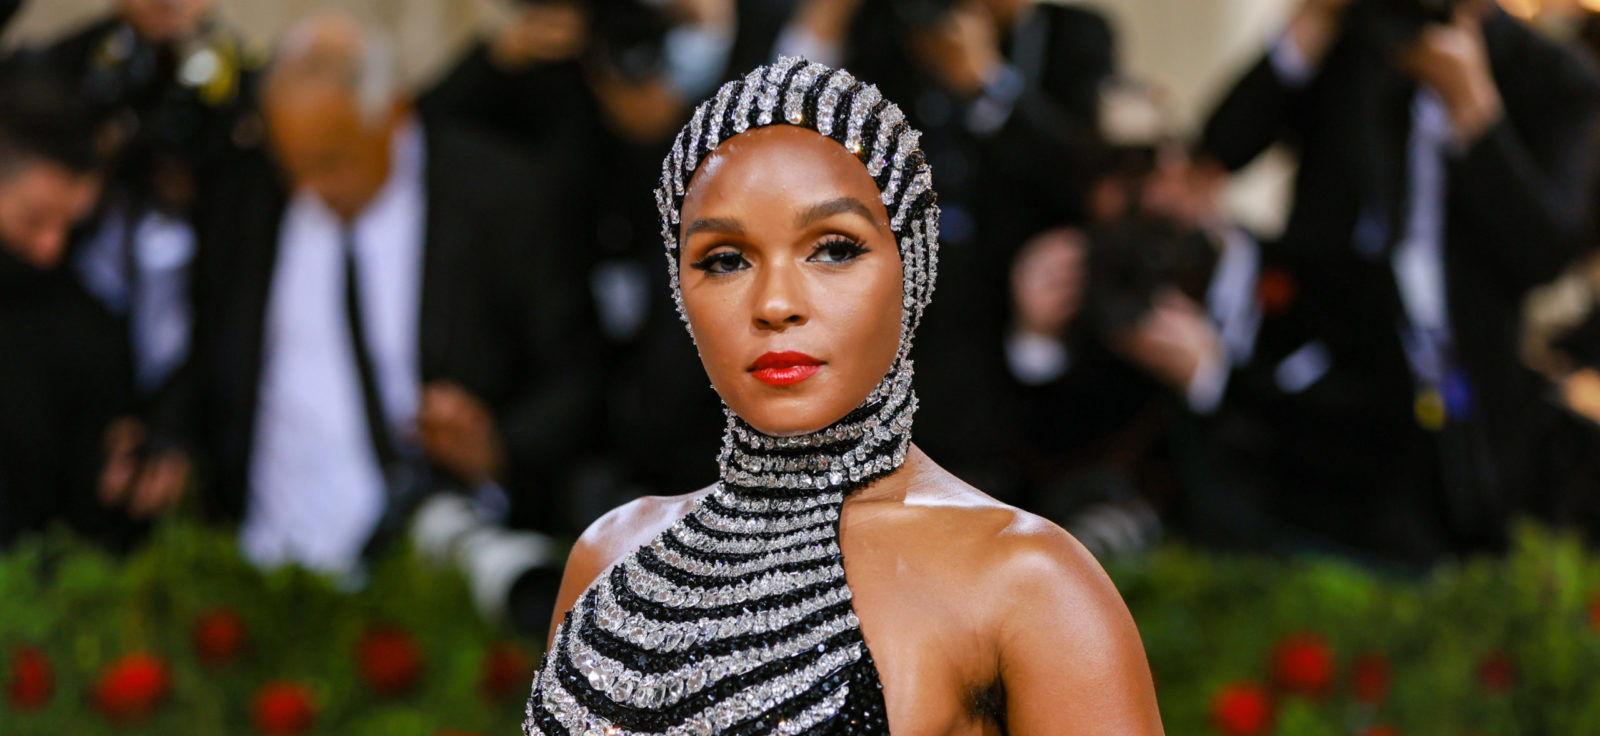 Opulent headpieces seem to be the trend du jour at the Met Gala